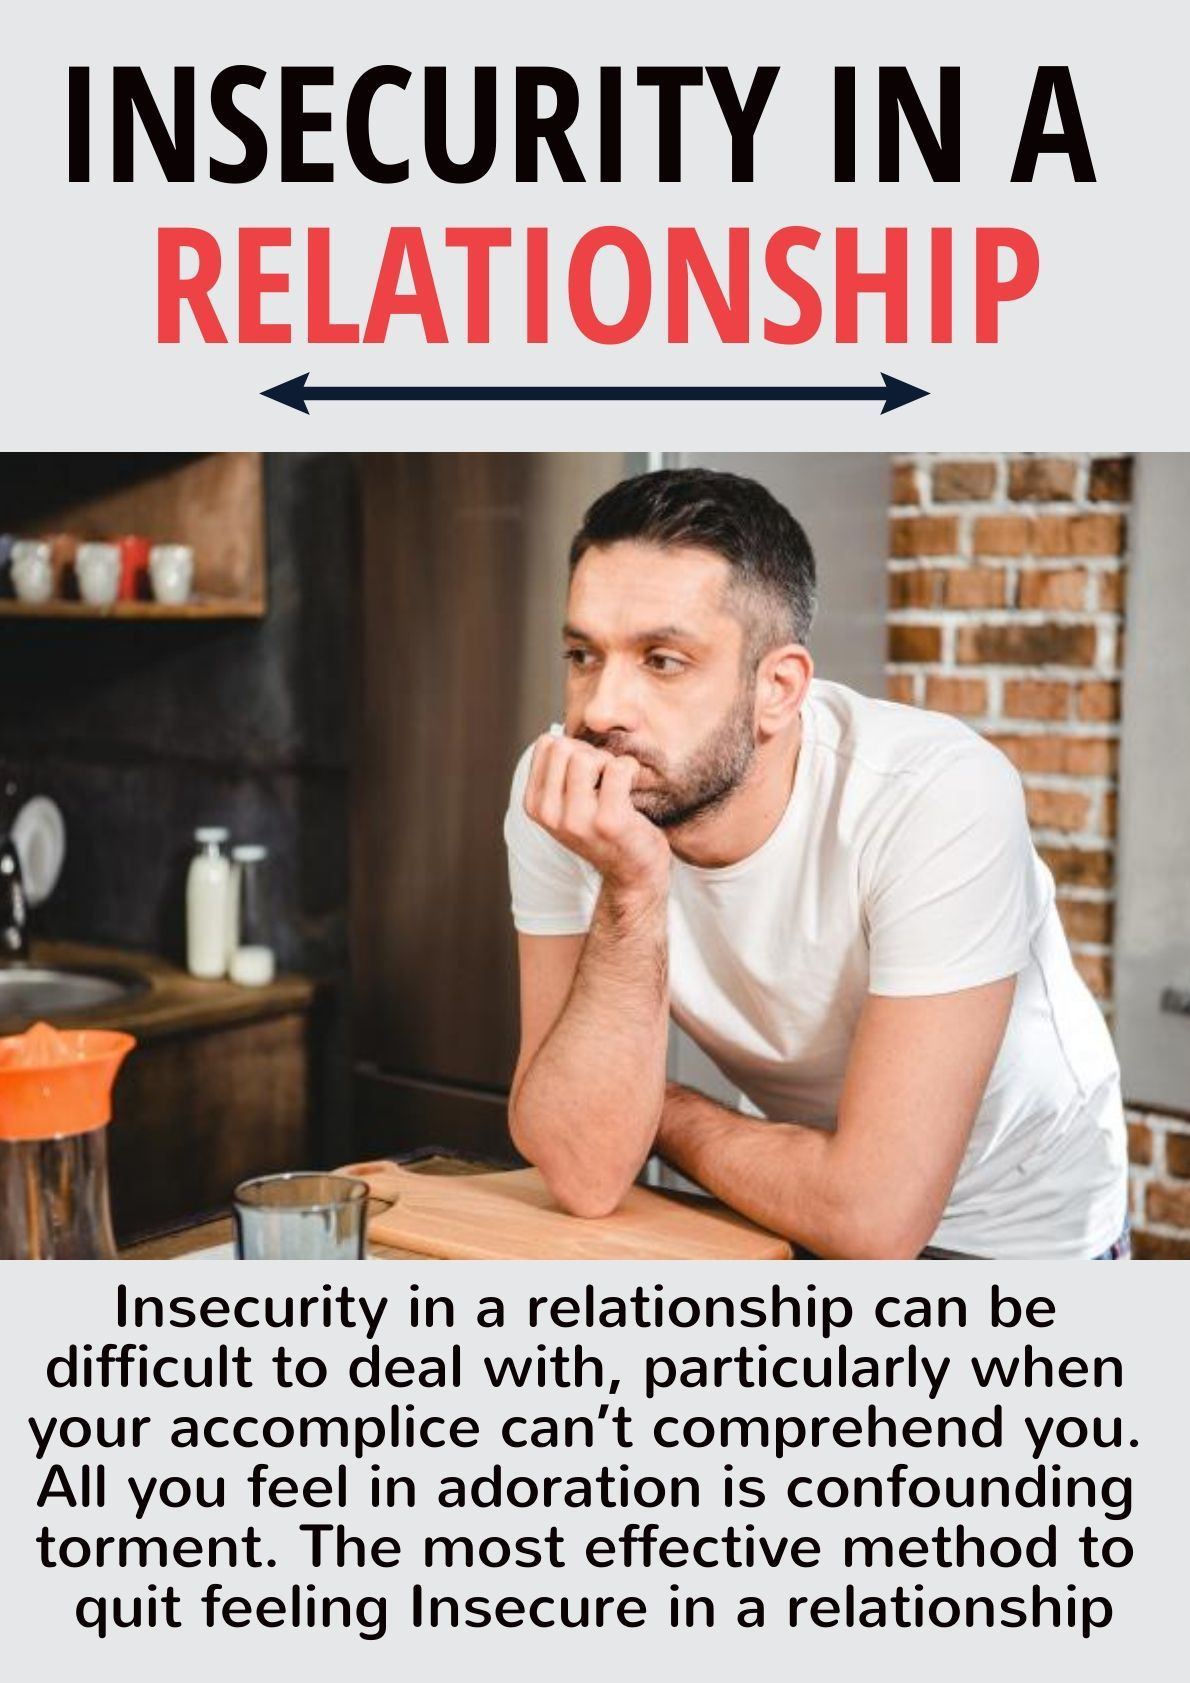 Feeling Insecure In A Relationship Quotes
 Insecurity in a relationship can be difficult to deal with